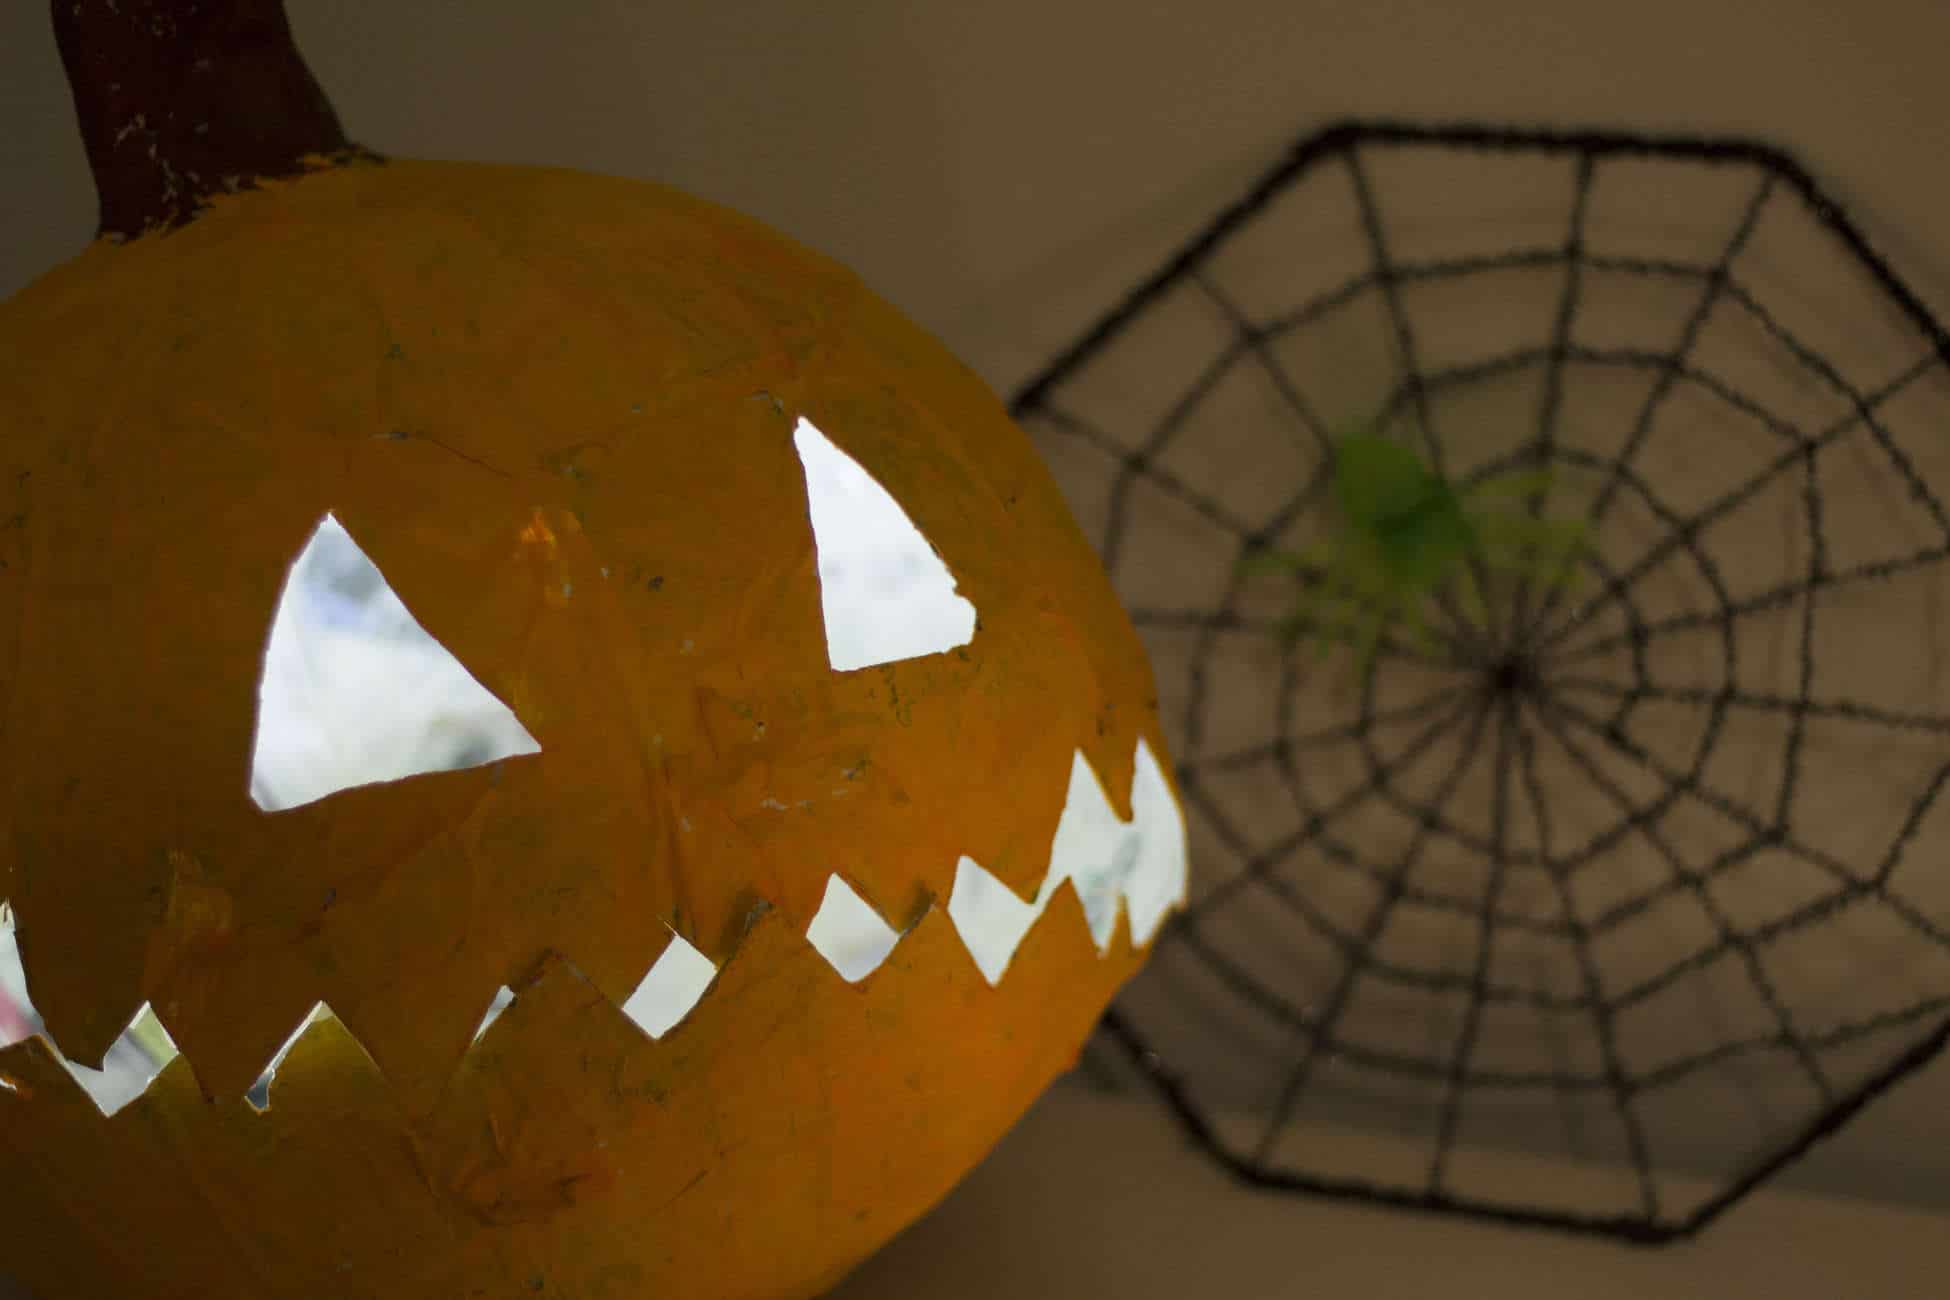 A carved pumpkin with a spider web on it, created using a paper mache tutorial.